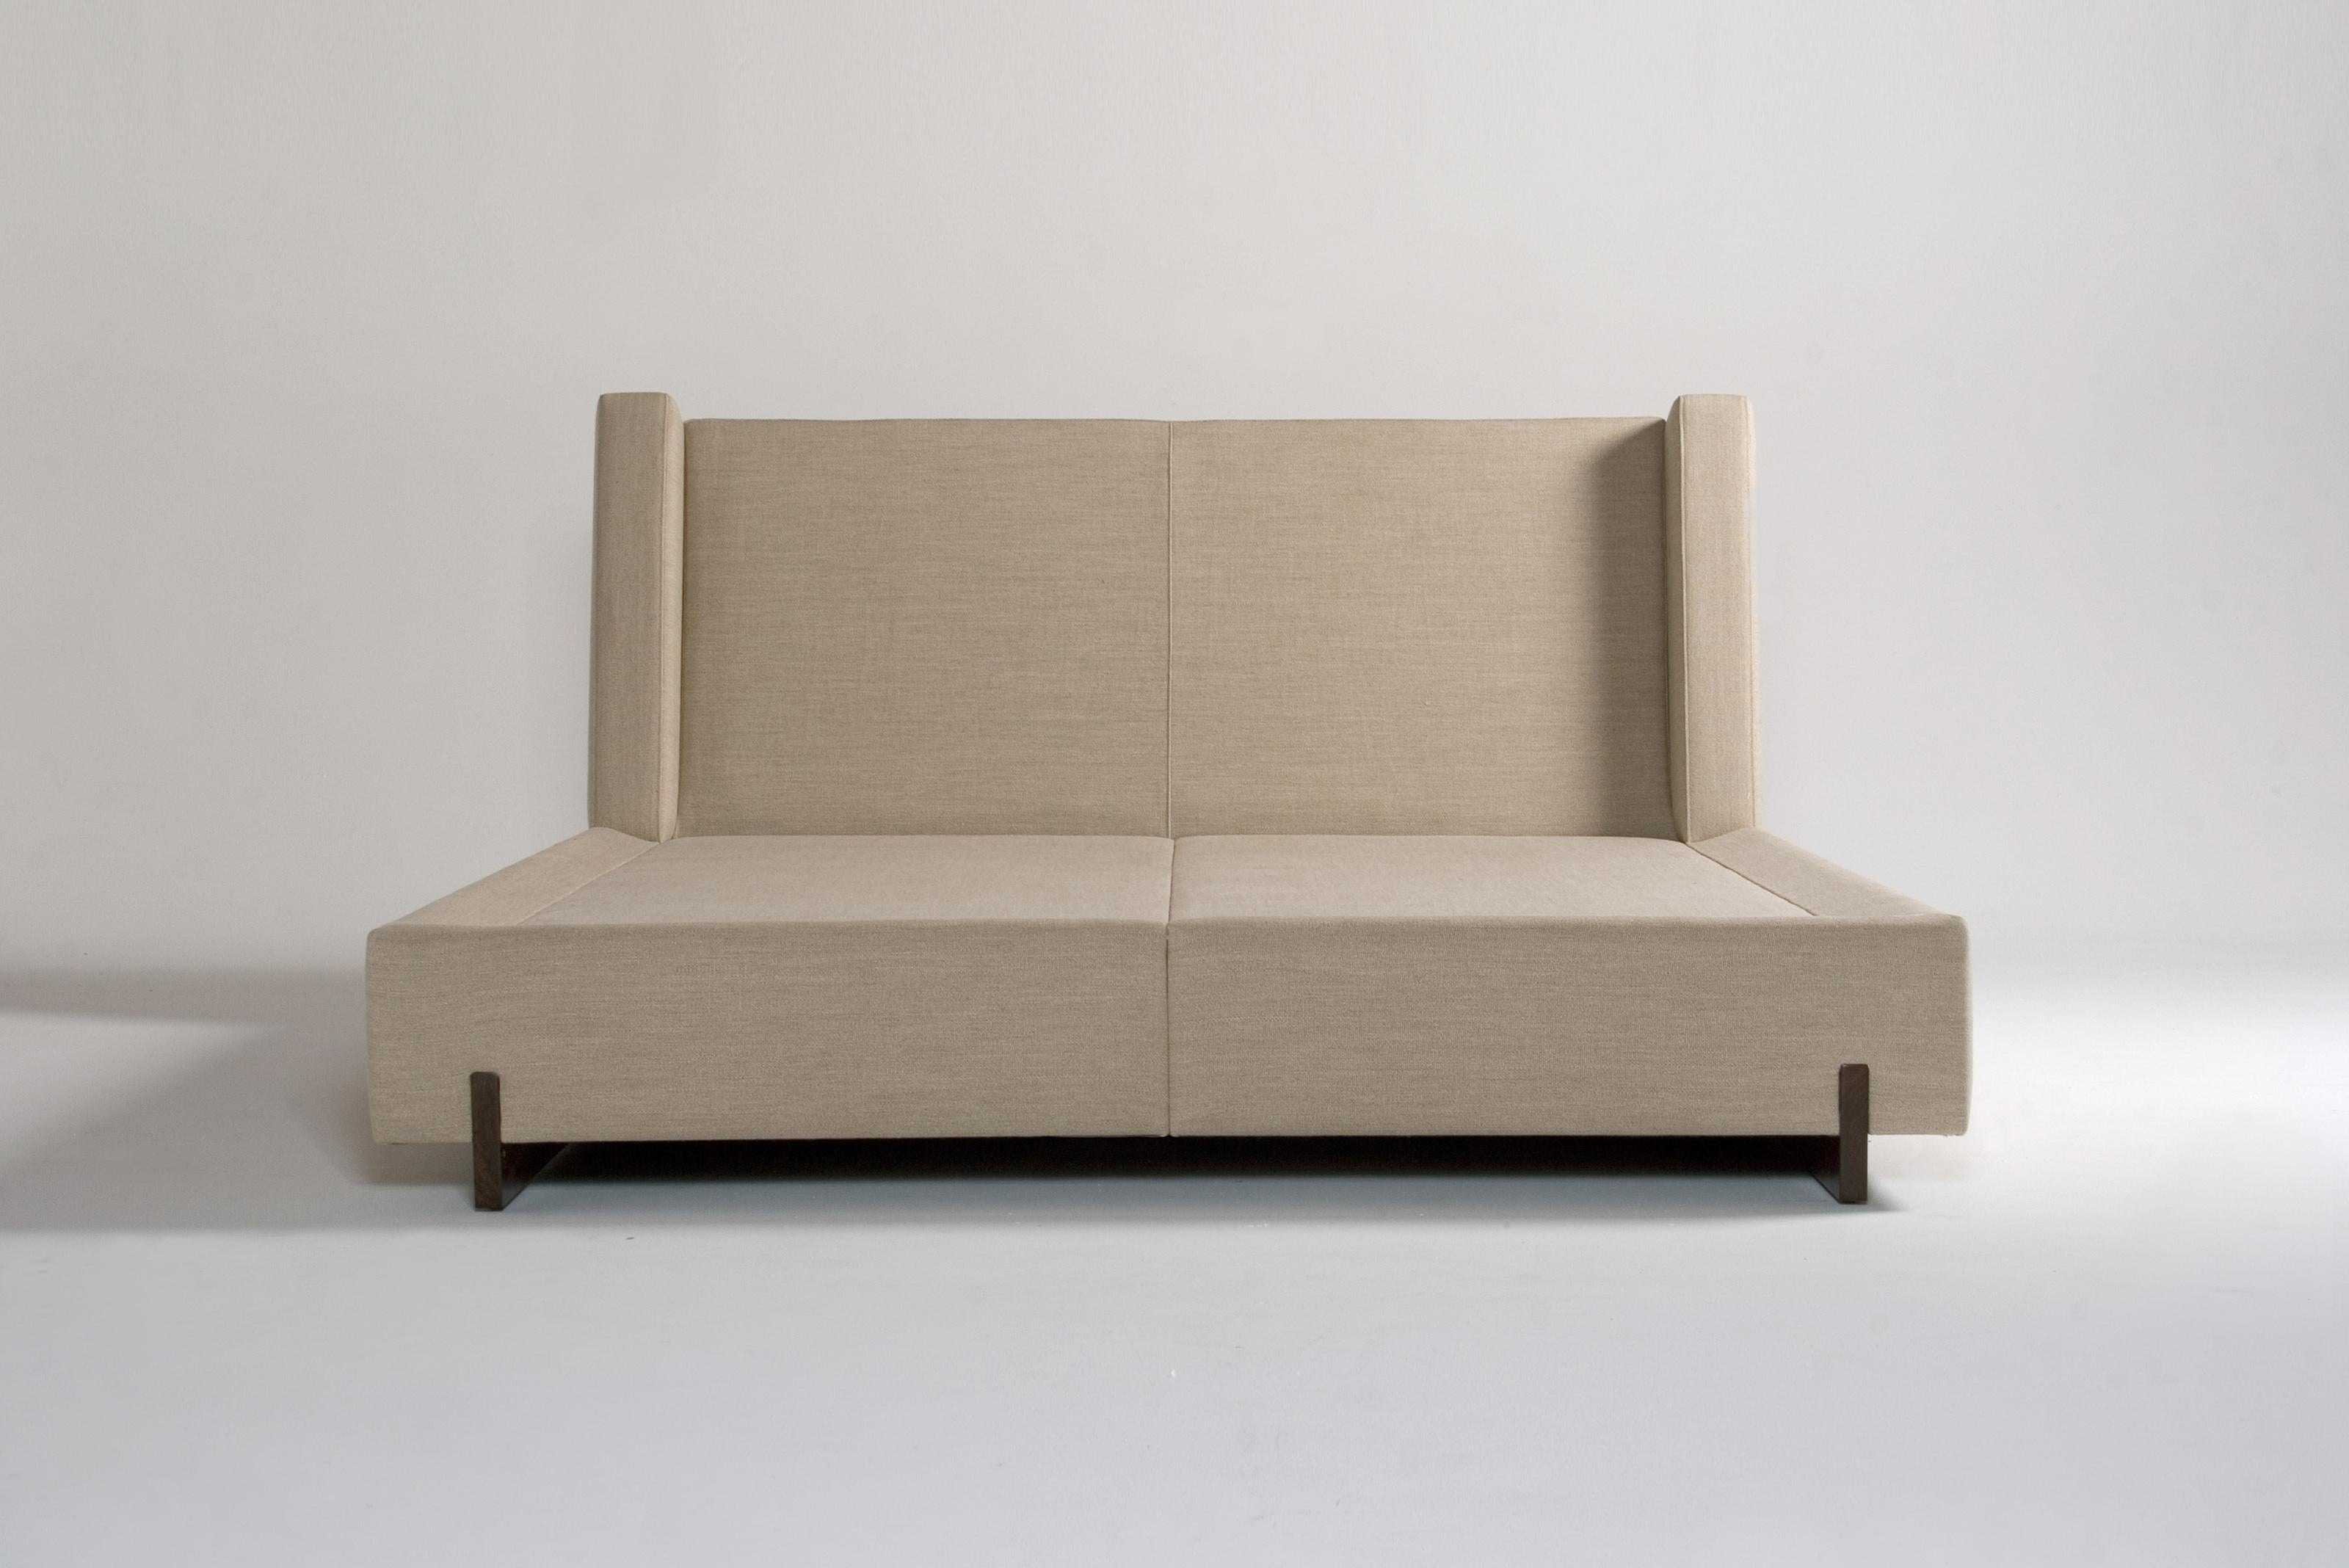 Trax King Bed by Phase Design
Dimensions: D 242.6 x W 213.4 x H 94 cm. 
Materials: Walnut and upholstery.

Solid wood legs with upholstered body. Available in walnut, white oak, or ebonized oak. Upholstery may be sourced in Customer Own Material